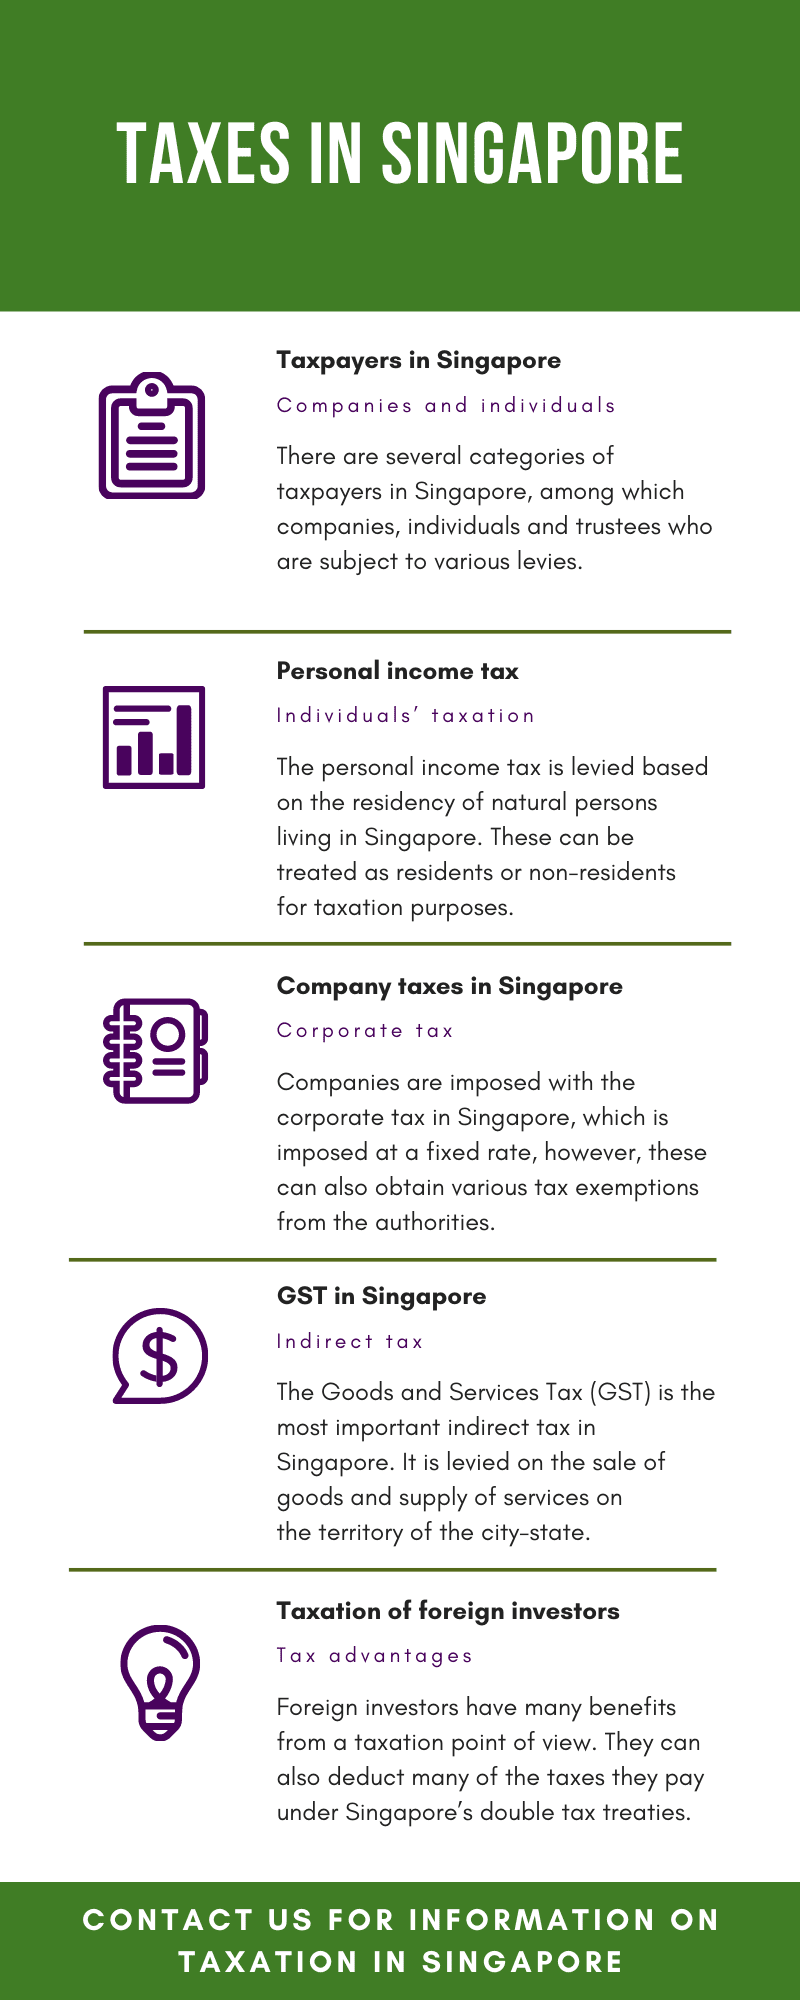 Taxes in Singapore